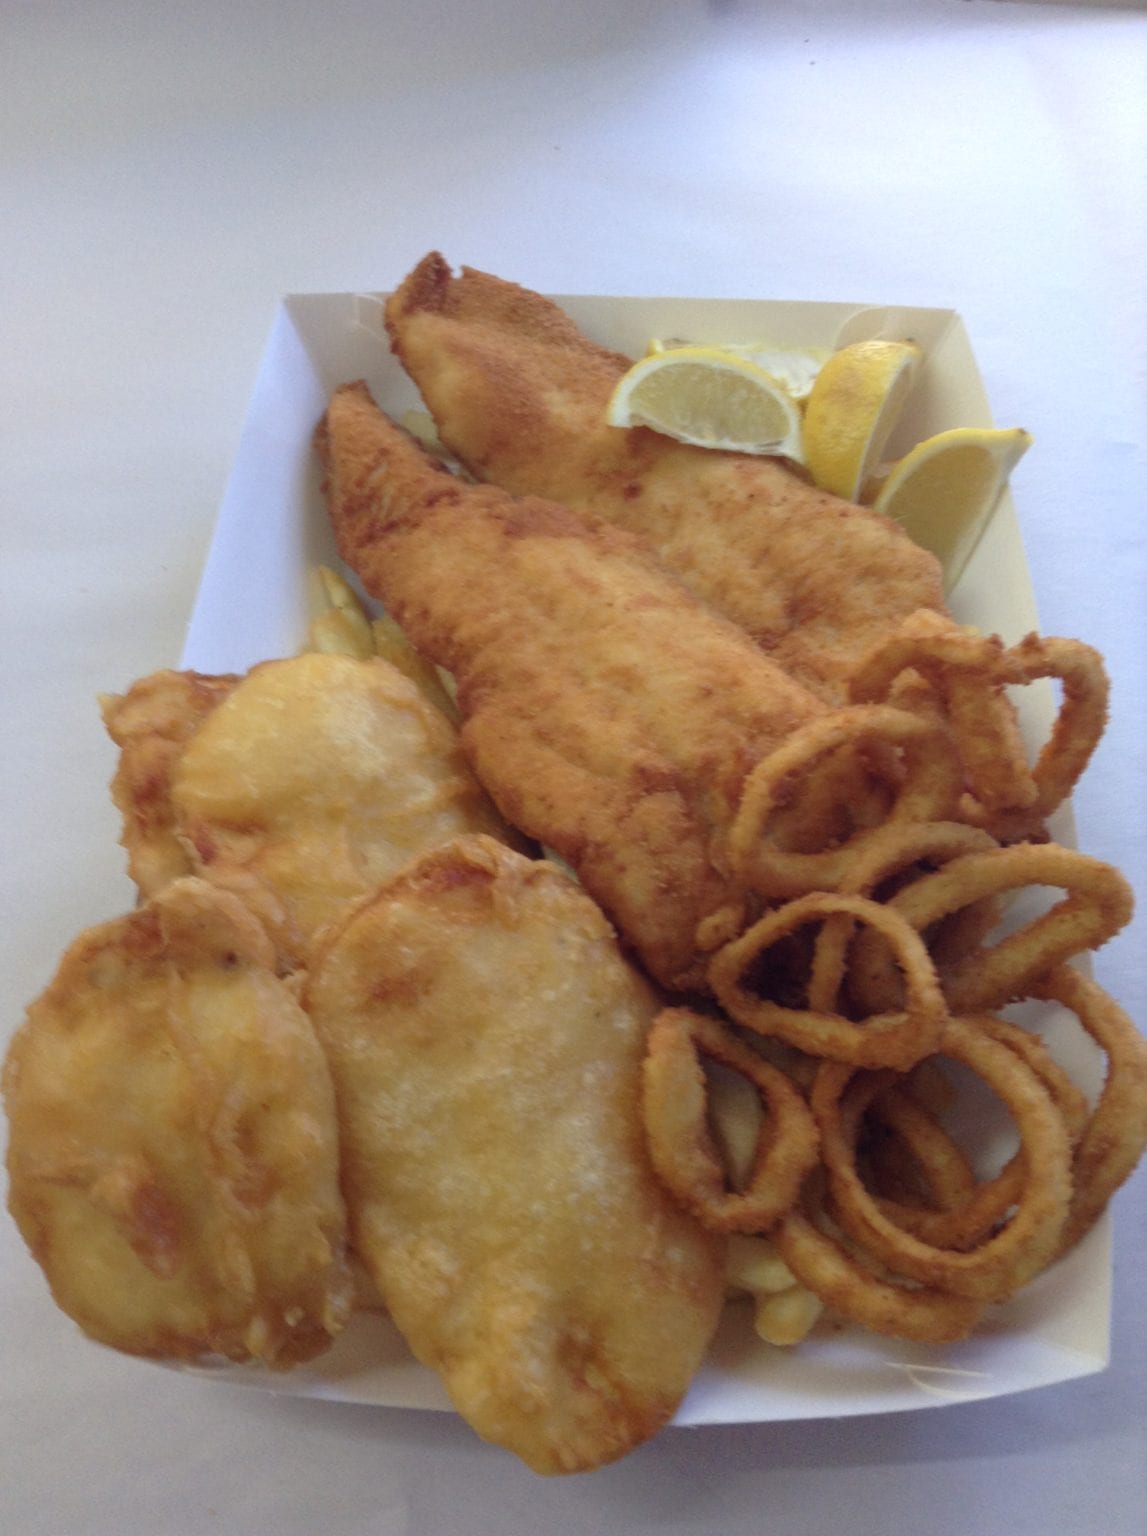 local fish and chips delivery